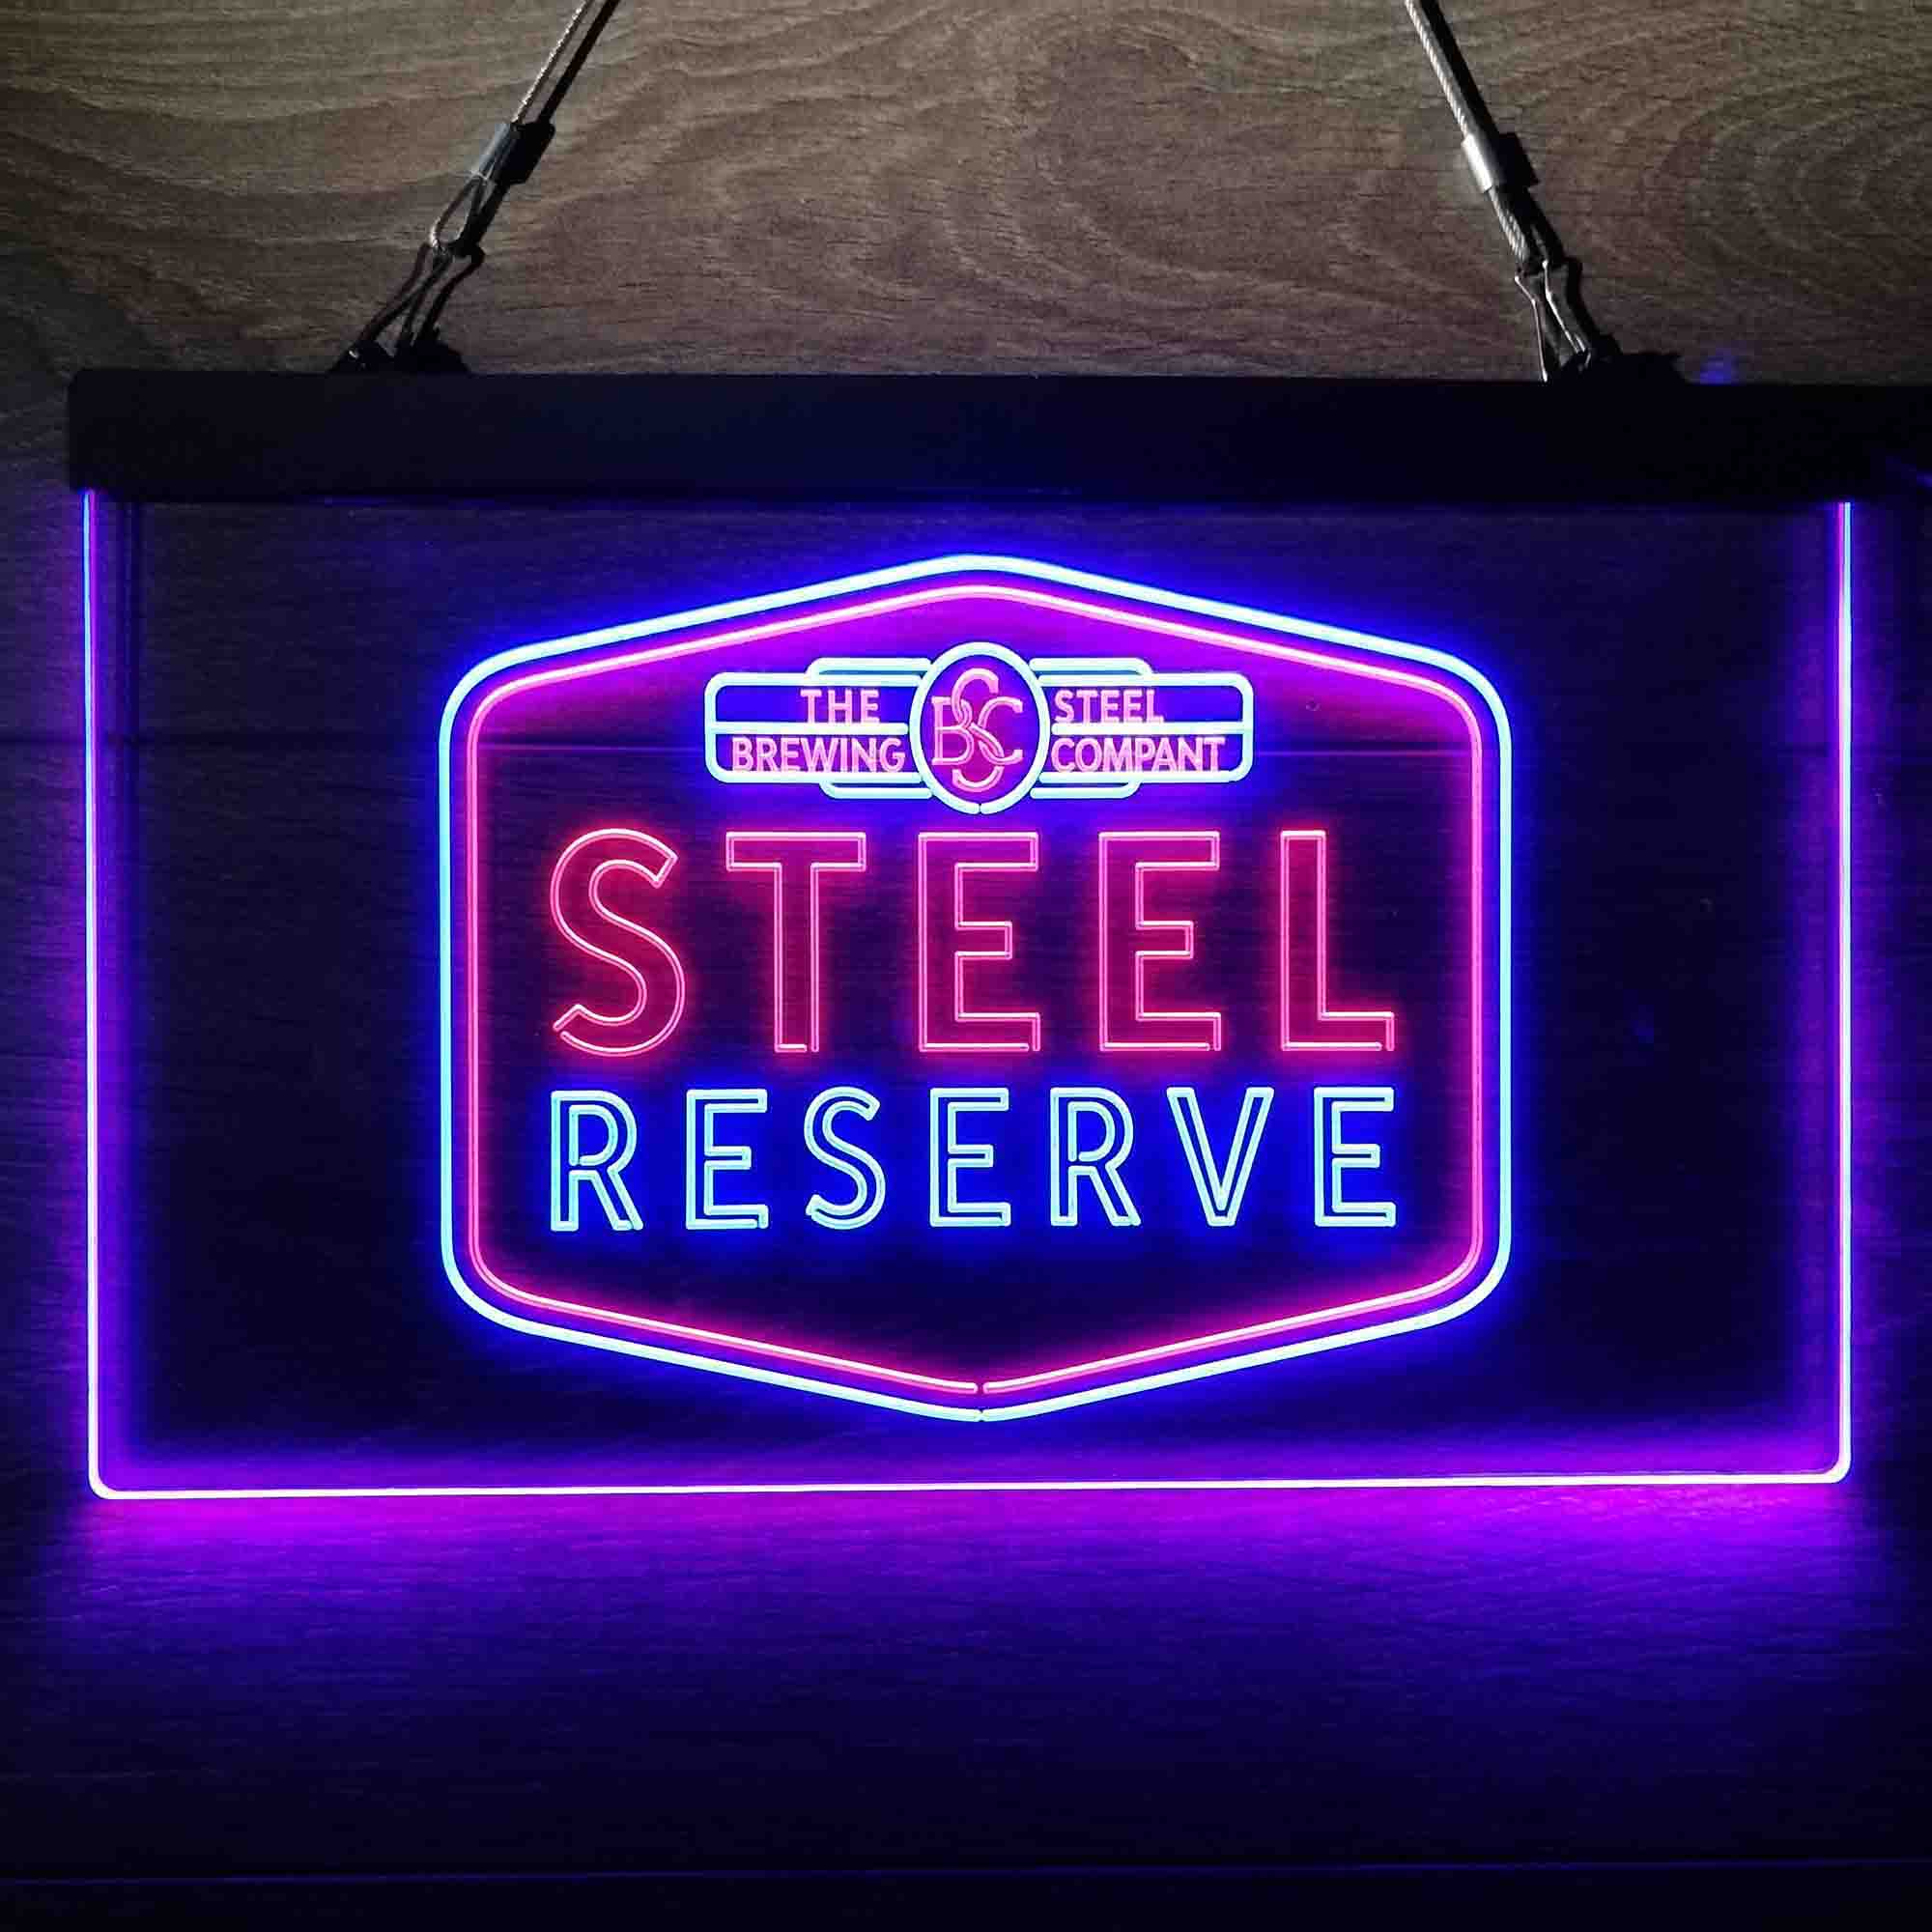 Steel Reserve Brewing Co.  Neon-Like LED Sign - ProLedSign